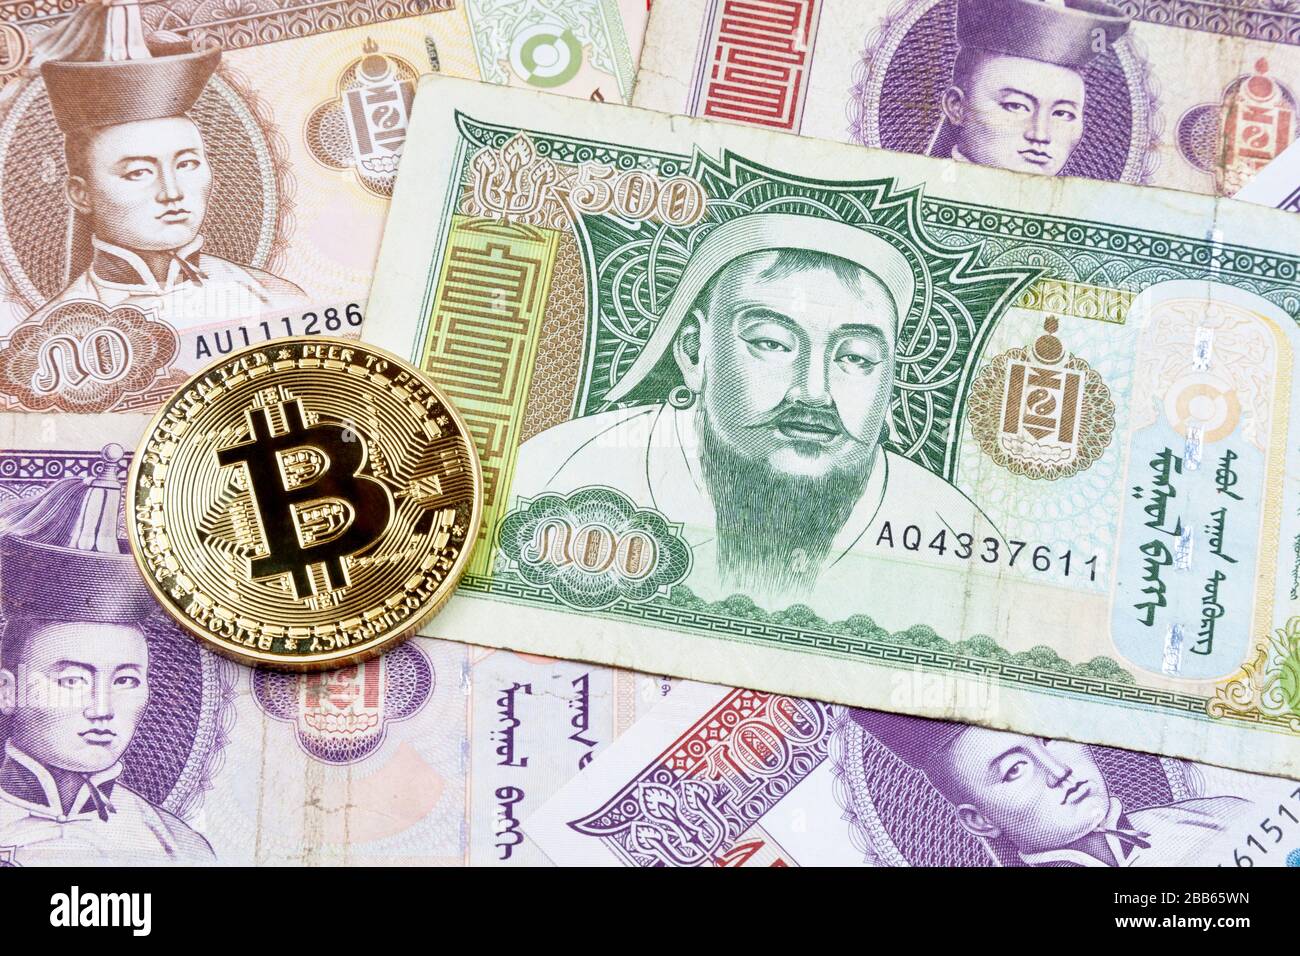 Close-up on a golden Bitcoin coin on top of a stack of Mongolian Tögrög banknotes. Stock Photo